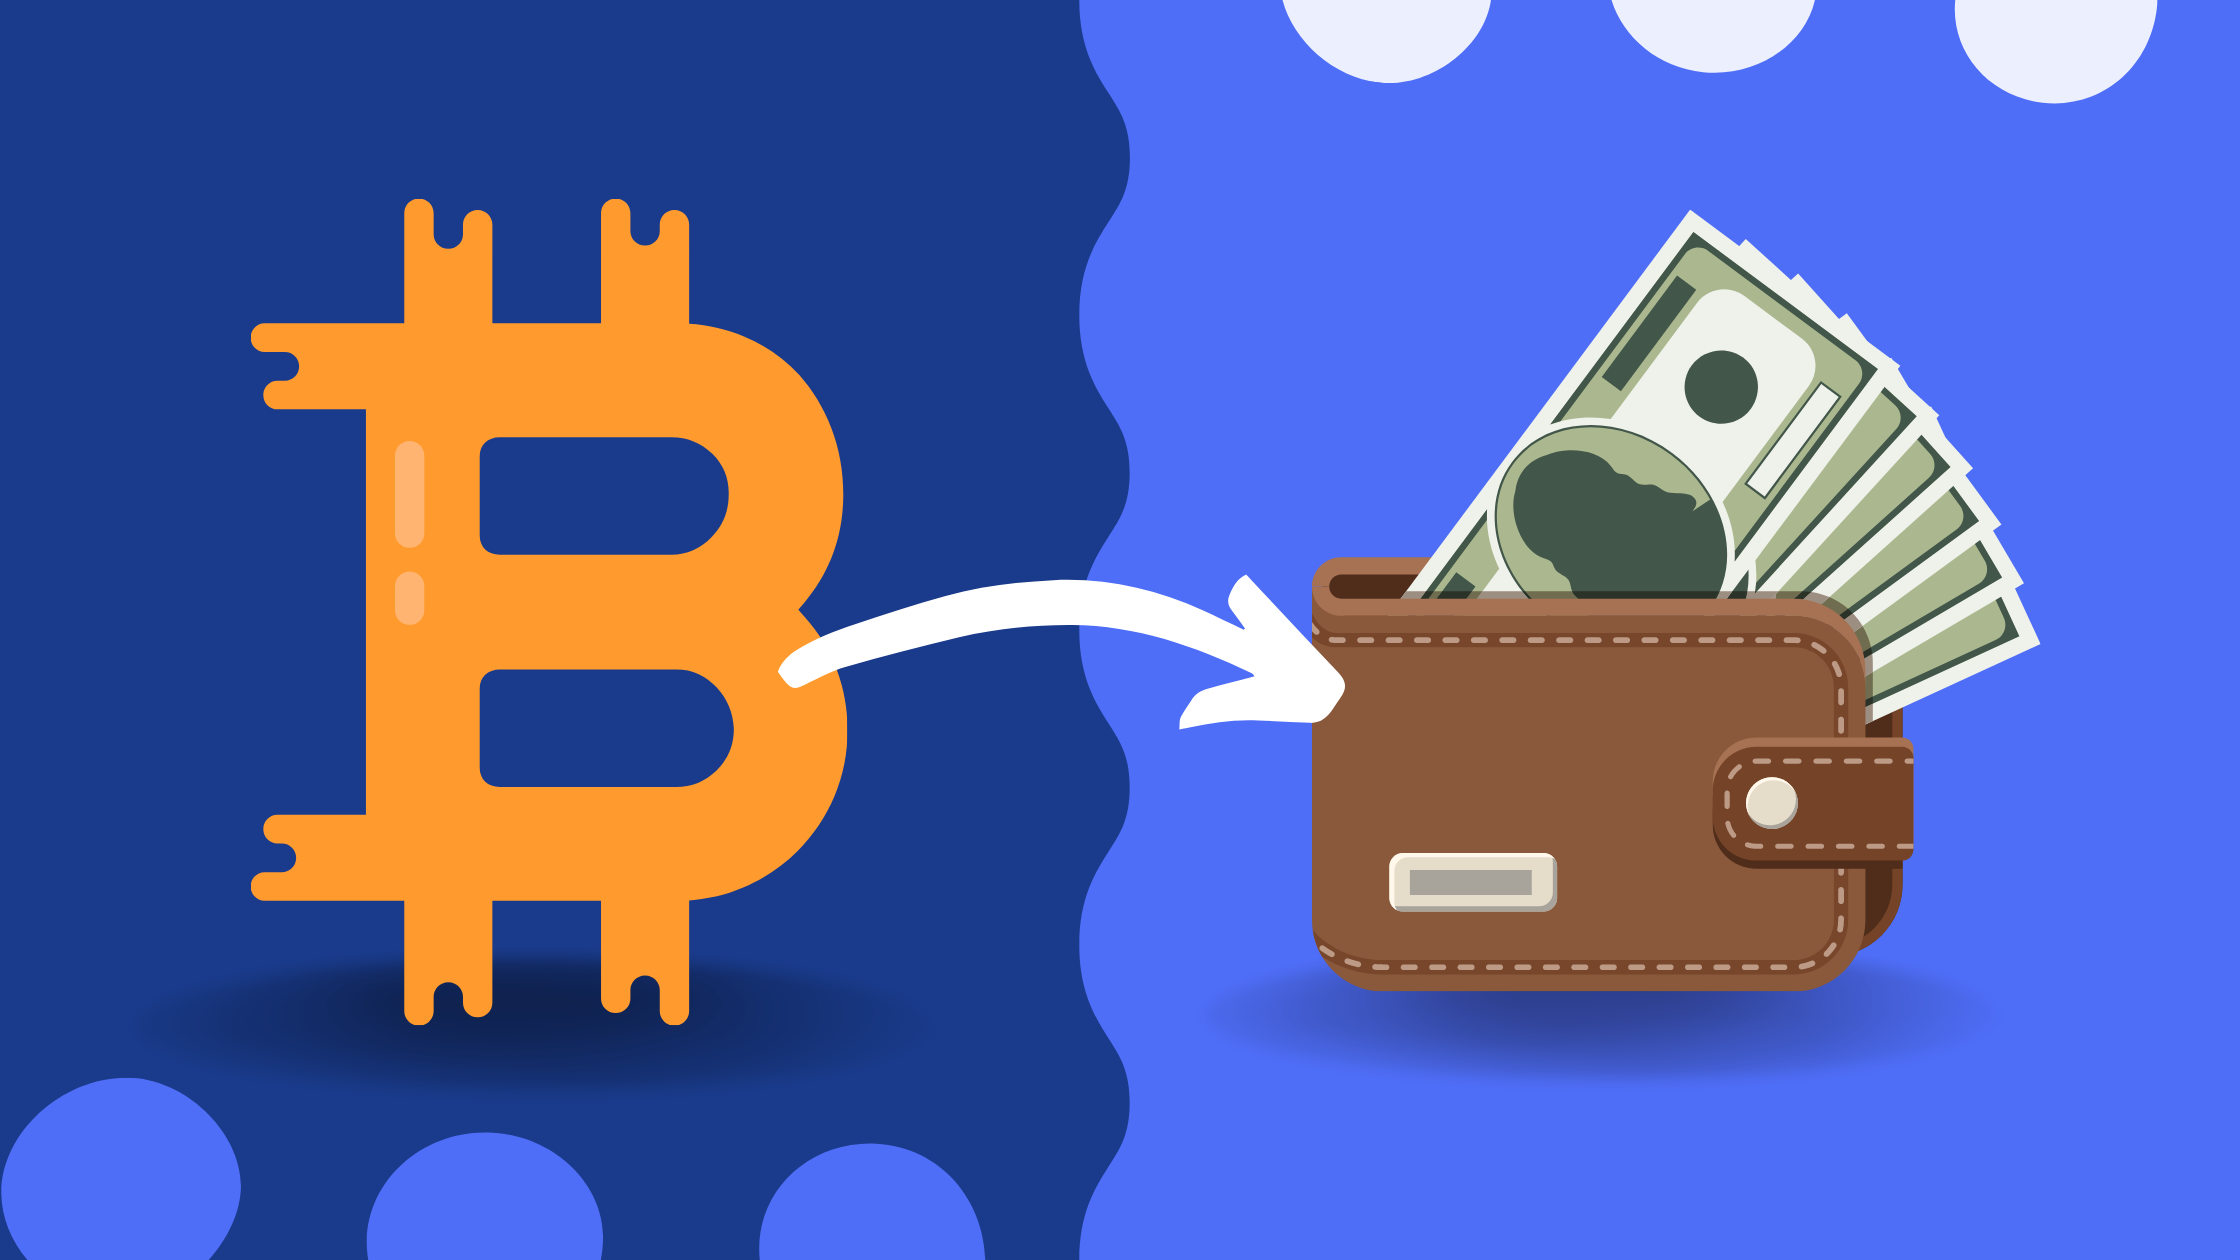 How to Sell Bitcoin: A Practical Guide - swissmoney